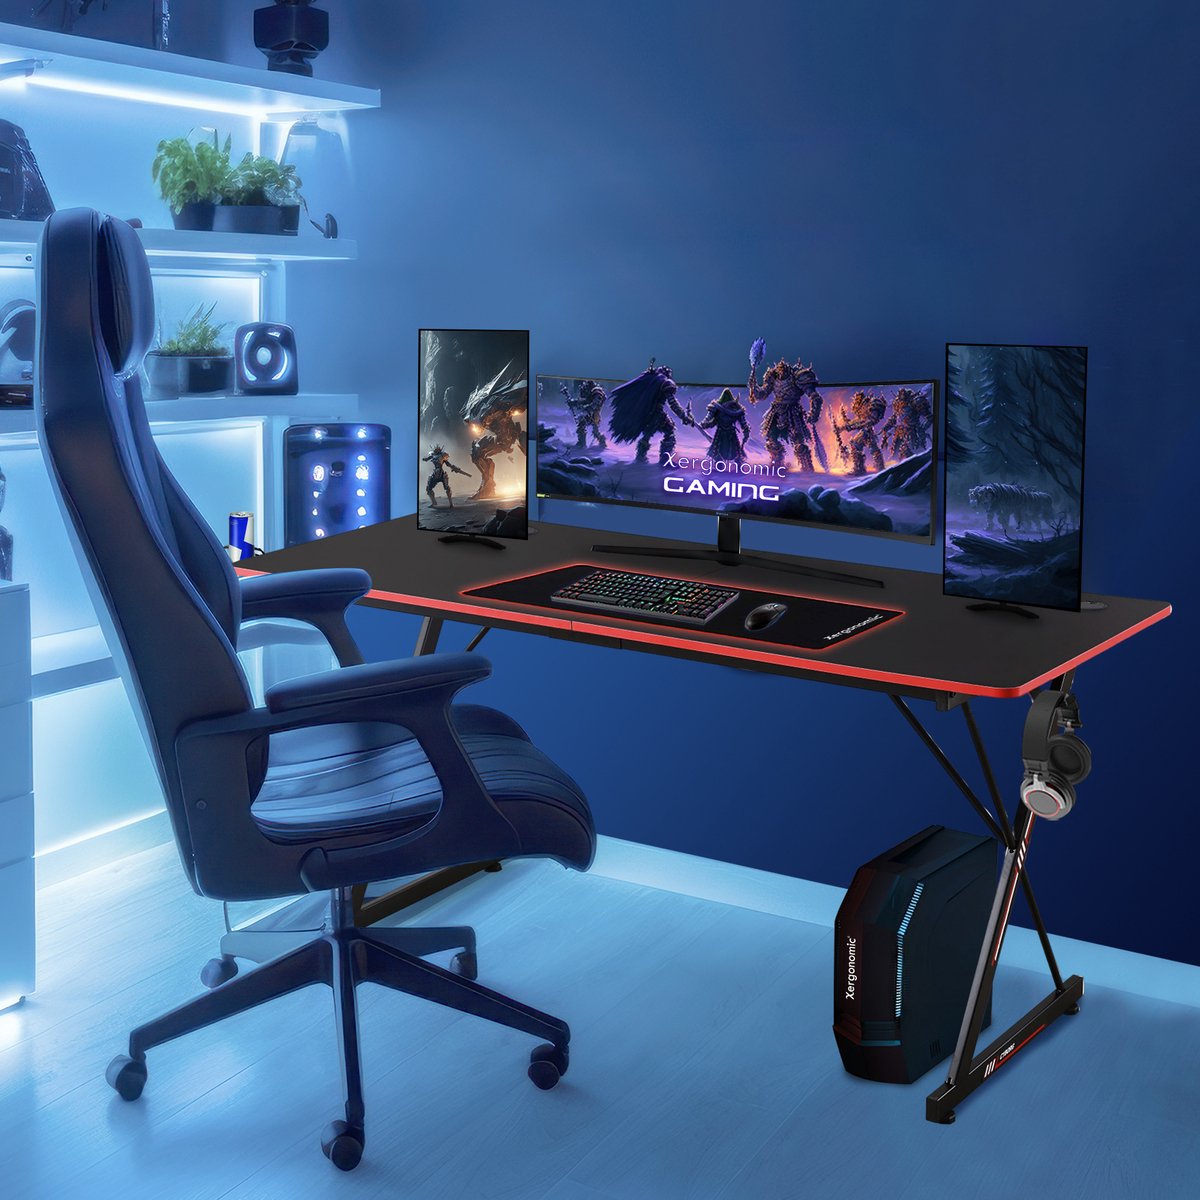 Xergonomic Aion Cyborg Gaming desk - Headphone holder, cup holder &amp; Cable organizer - Carbon Fiber Coated Top Layer - Adjustable legs - D60xW160xH75 cm - Black/Red